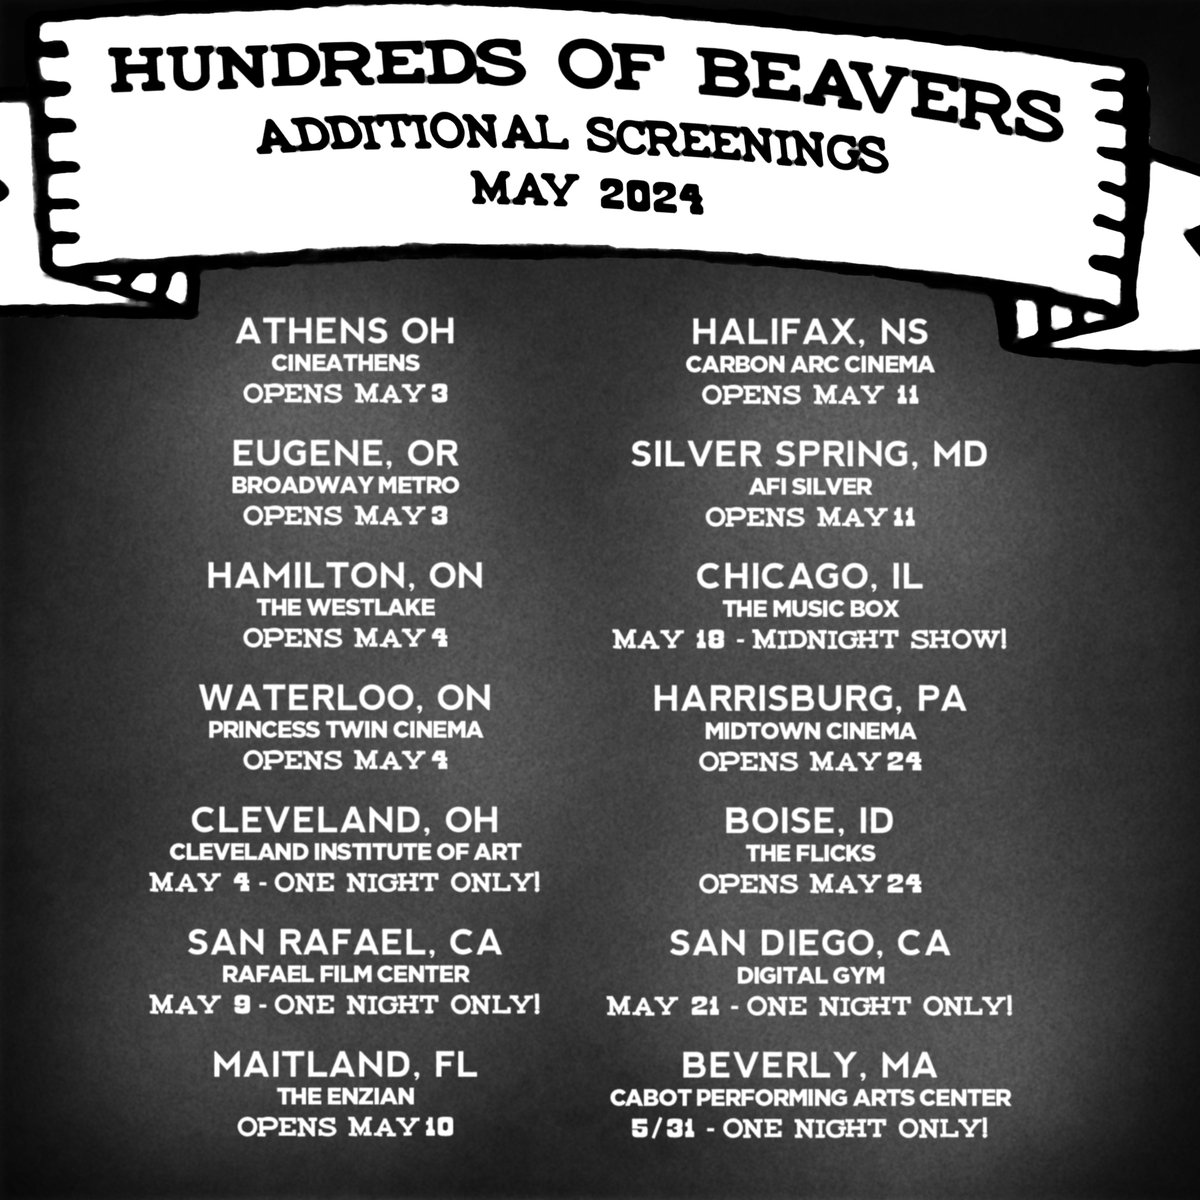 🦫🚨 BEAVER ALERT: As Spring Awakens, so doth Furry Aquatic Menaces! Alert All Friends Within Proximity! Reports Indicate 16 Indie & Historic Theaters Hosting Fan Appreciation Screenings with Raccoon Hat Raffles! THIS WEEKEND: @cstpdx @balboatheatresf and @4StarTheater! Wear